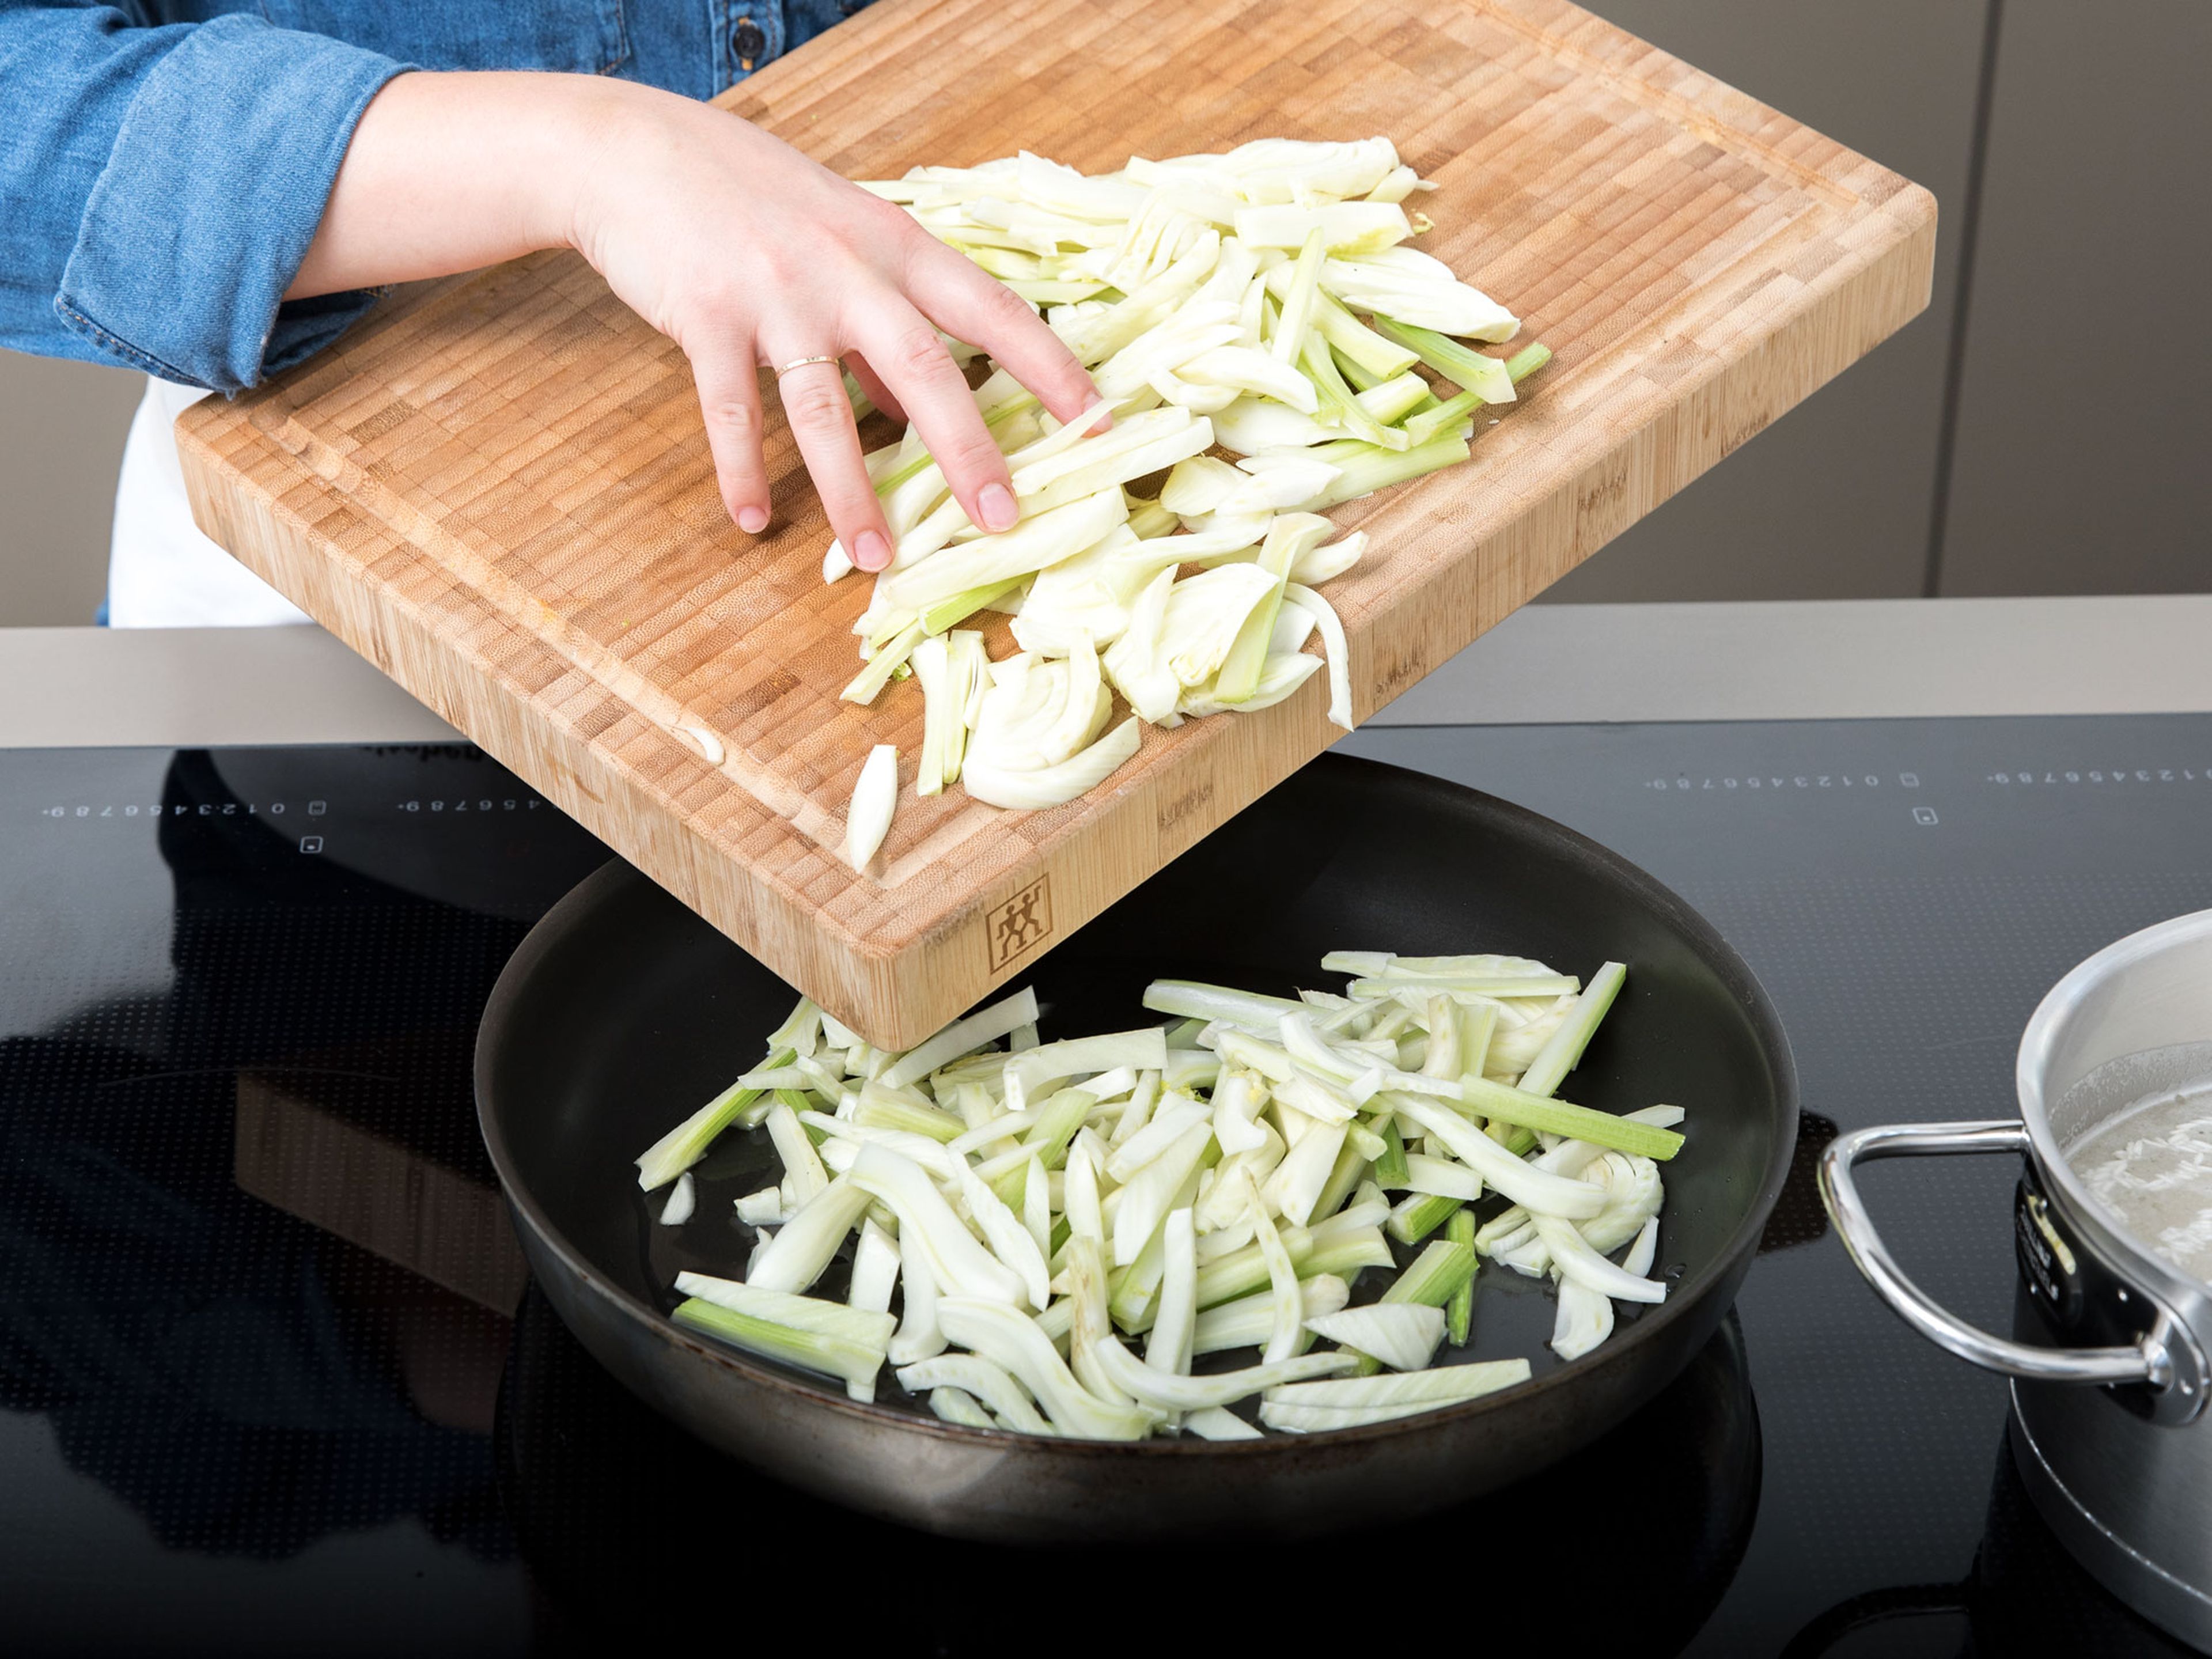 Add fennel and water to a large frying pan, cover with a lid and steam until the fennel is softened. Remove fennel from the pan and transfer to a large bowl.